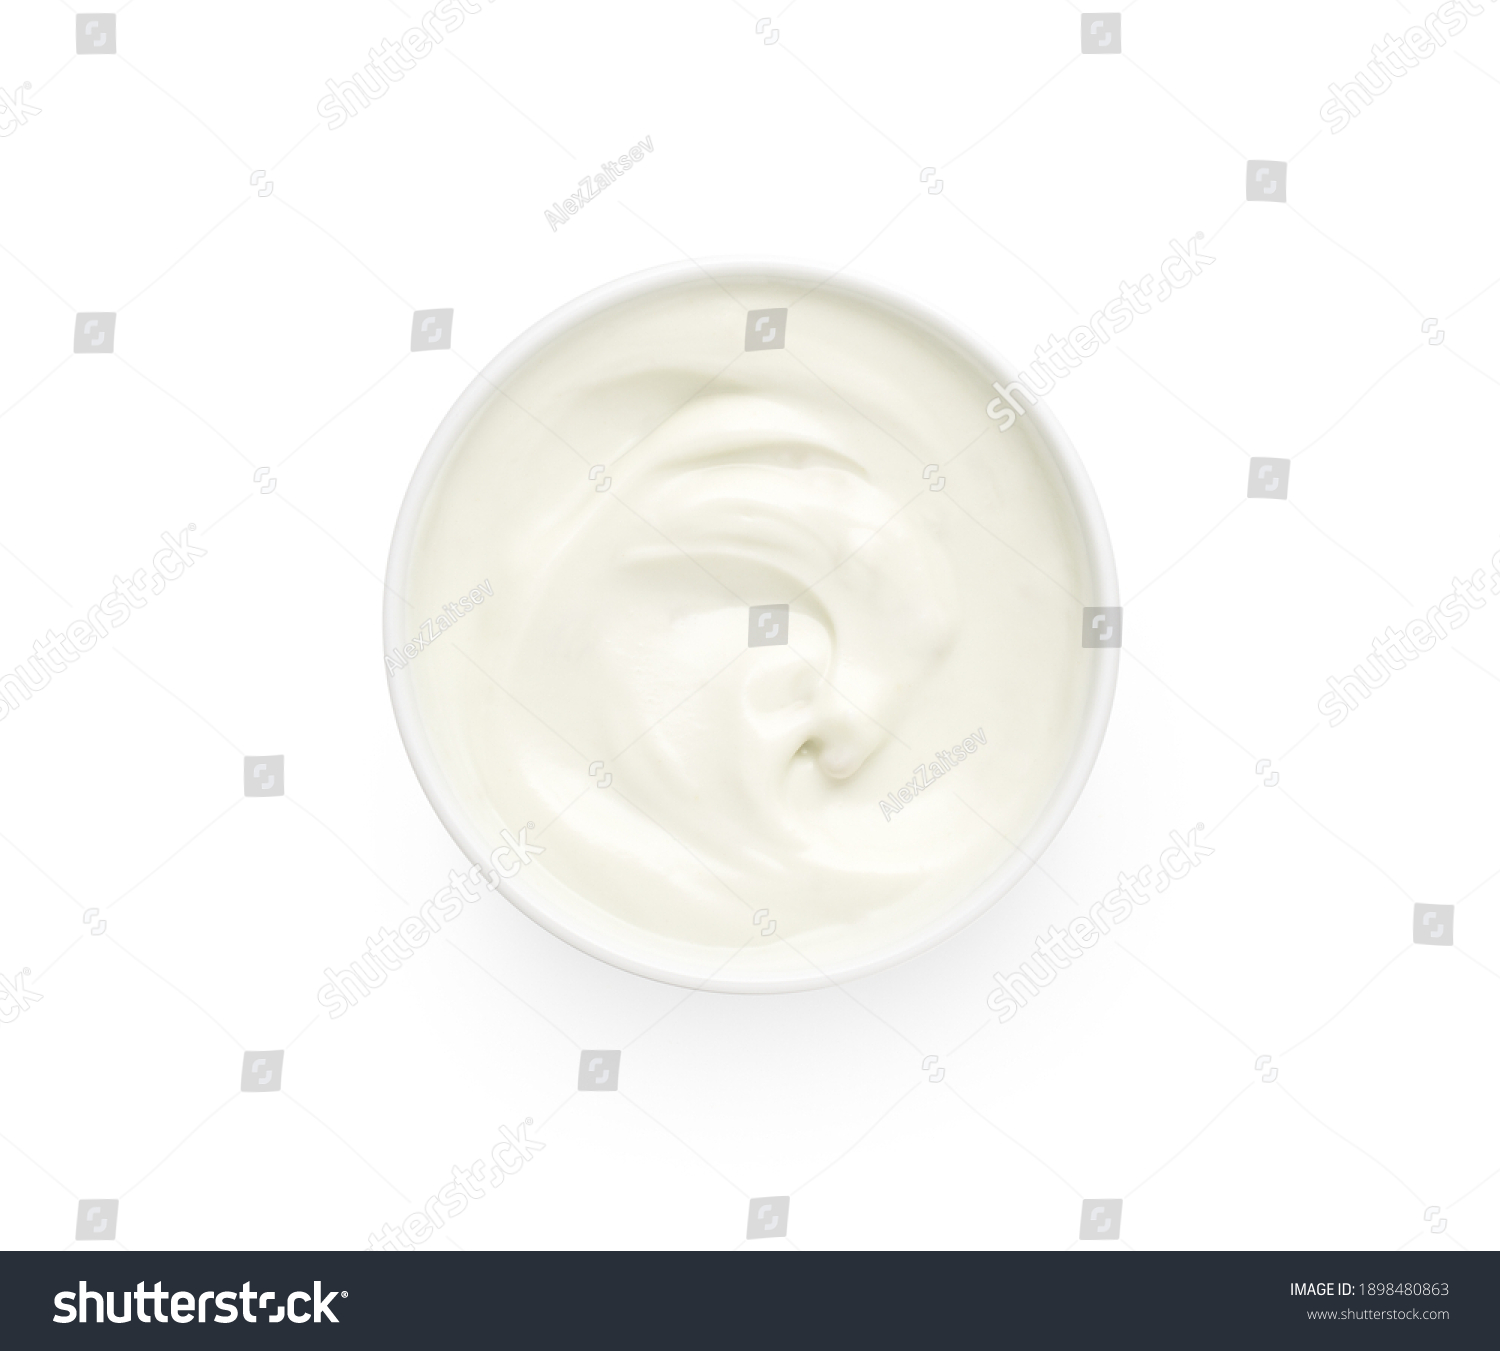 Bowl of white creamy yogurt isolated on white background, top view, flat lay #1898480863